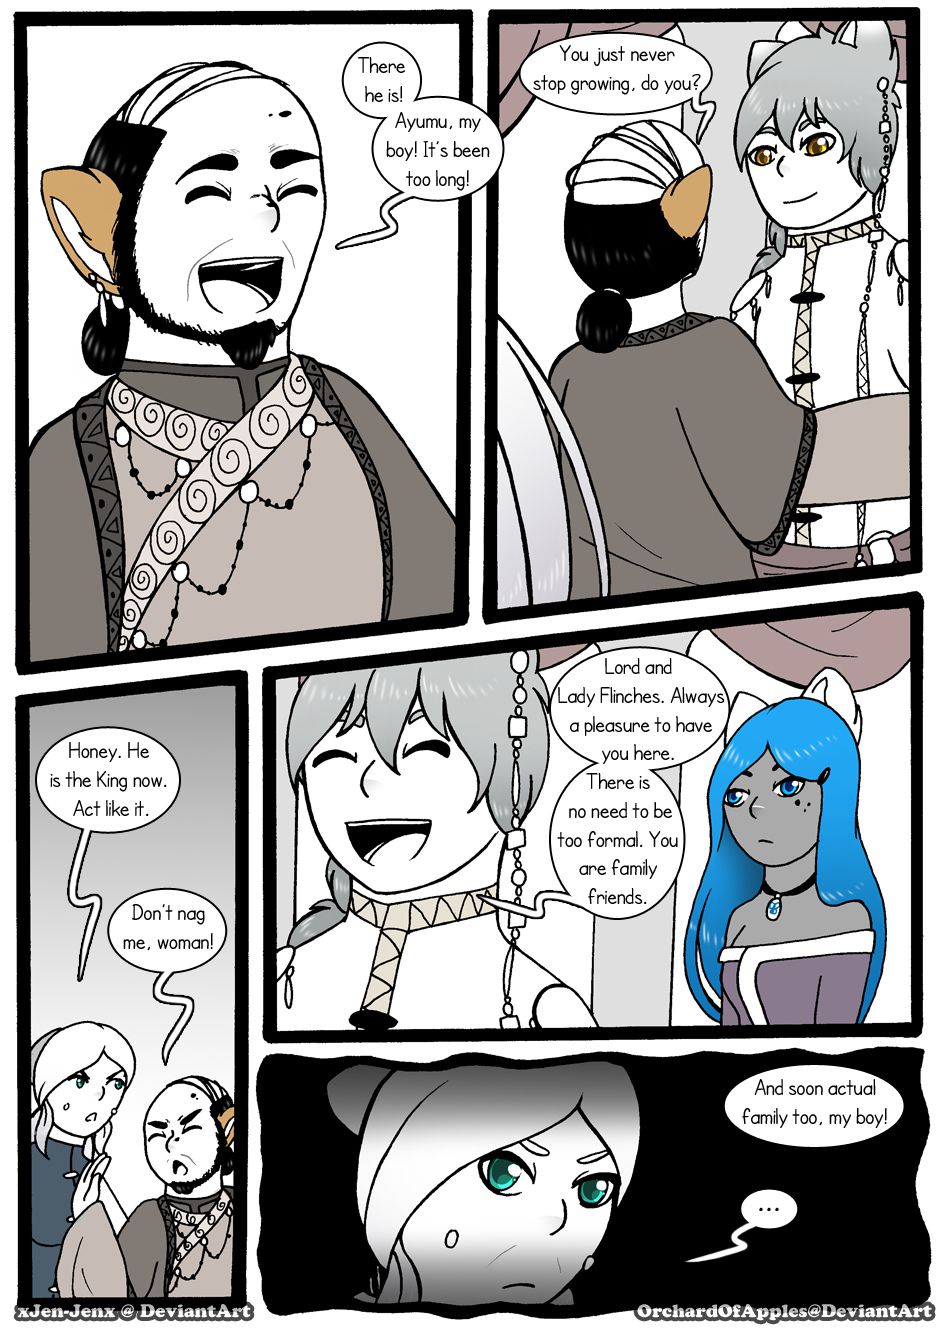 [Jeny-jen94] Between Kings and Queens [Ongoing] 194